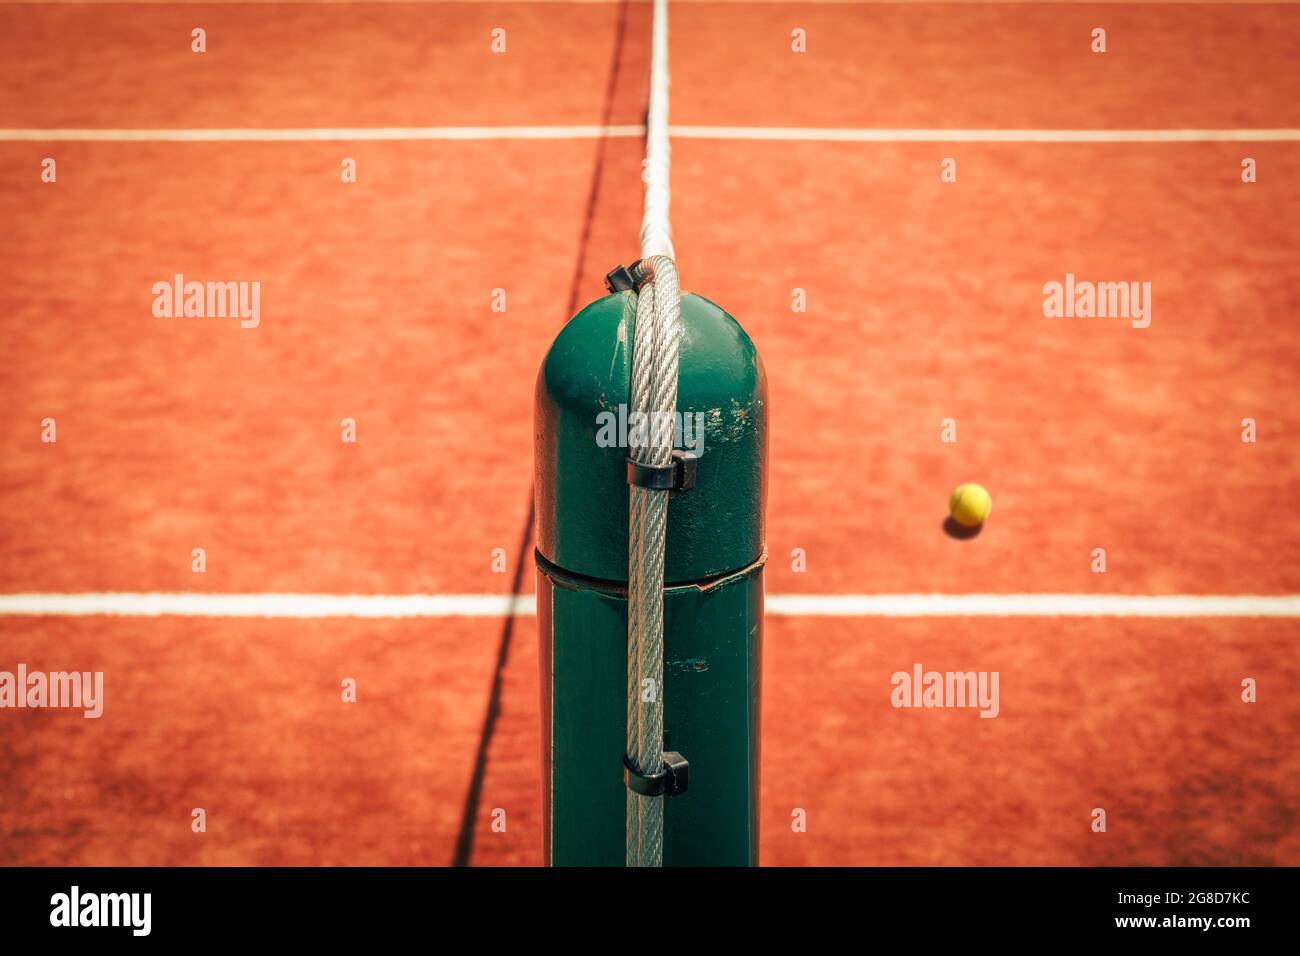 Worn steel tennis post and tennis ball from high angle. Tennis post dividing court to halves. Competitive individual sports concept. Stock Photo